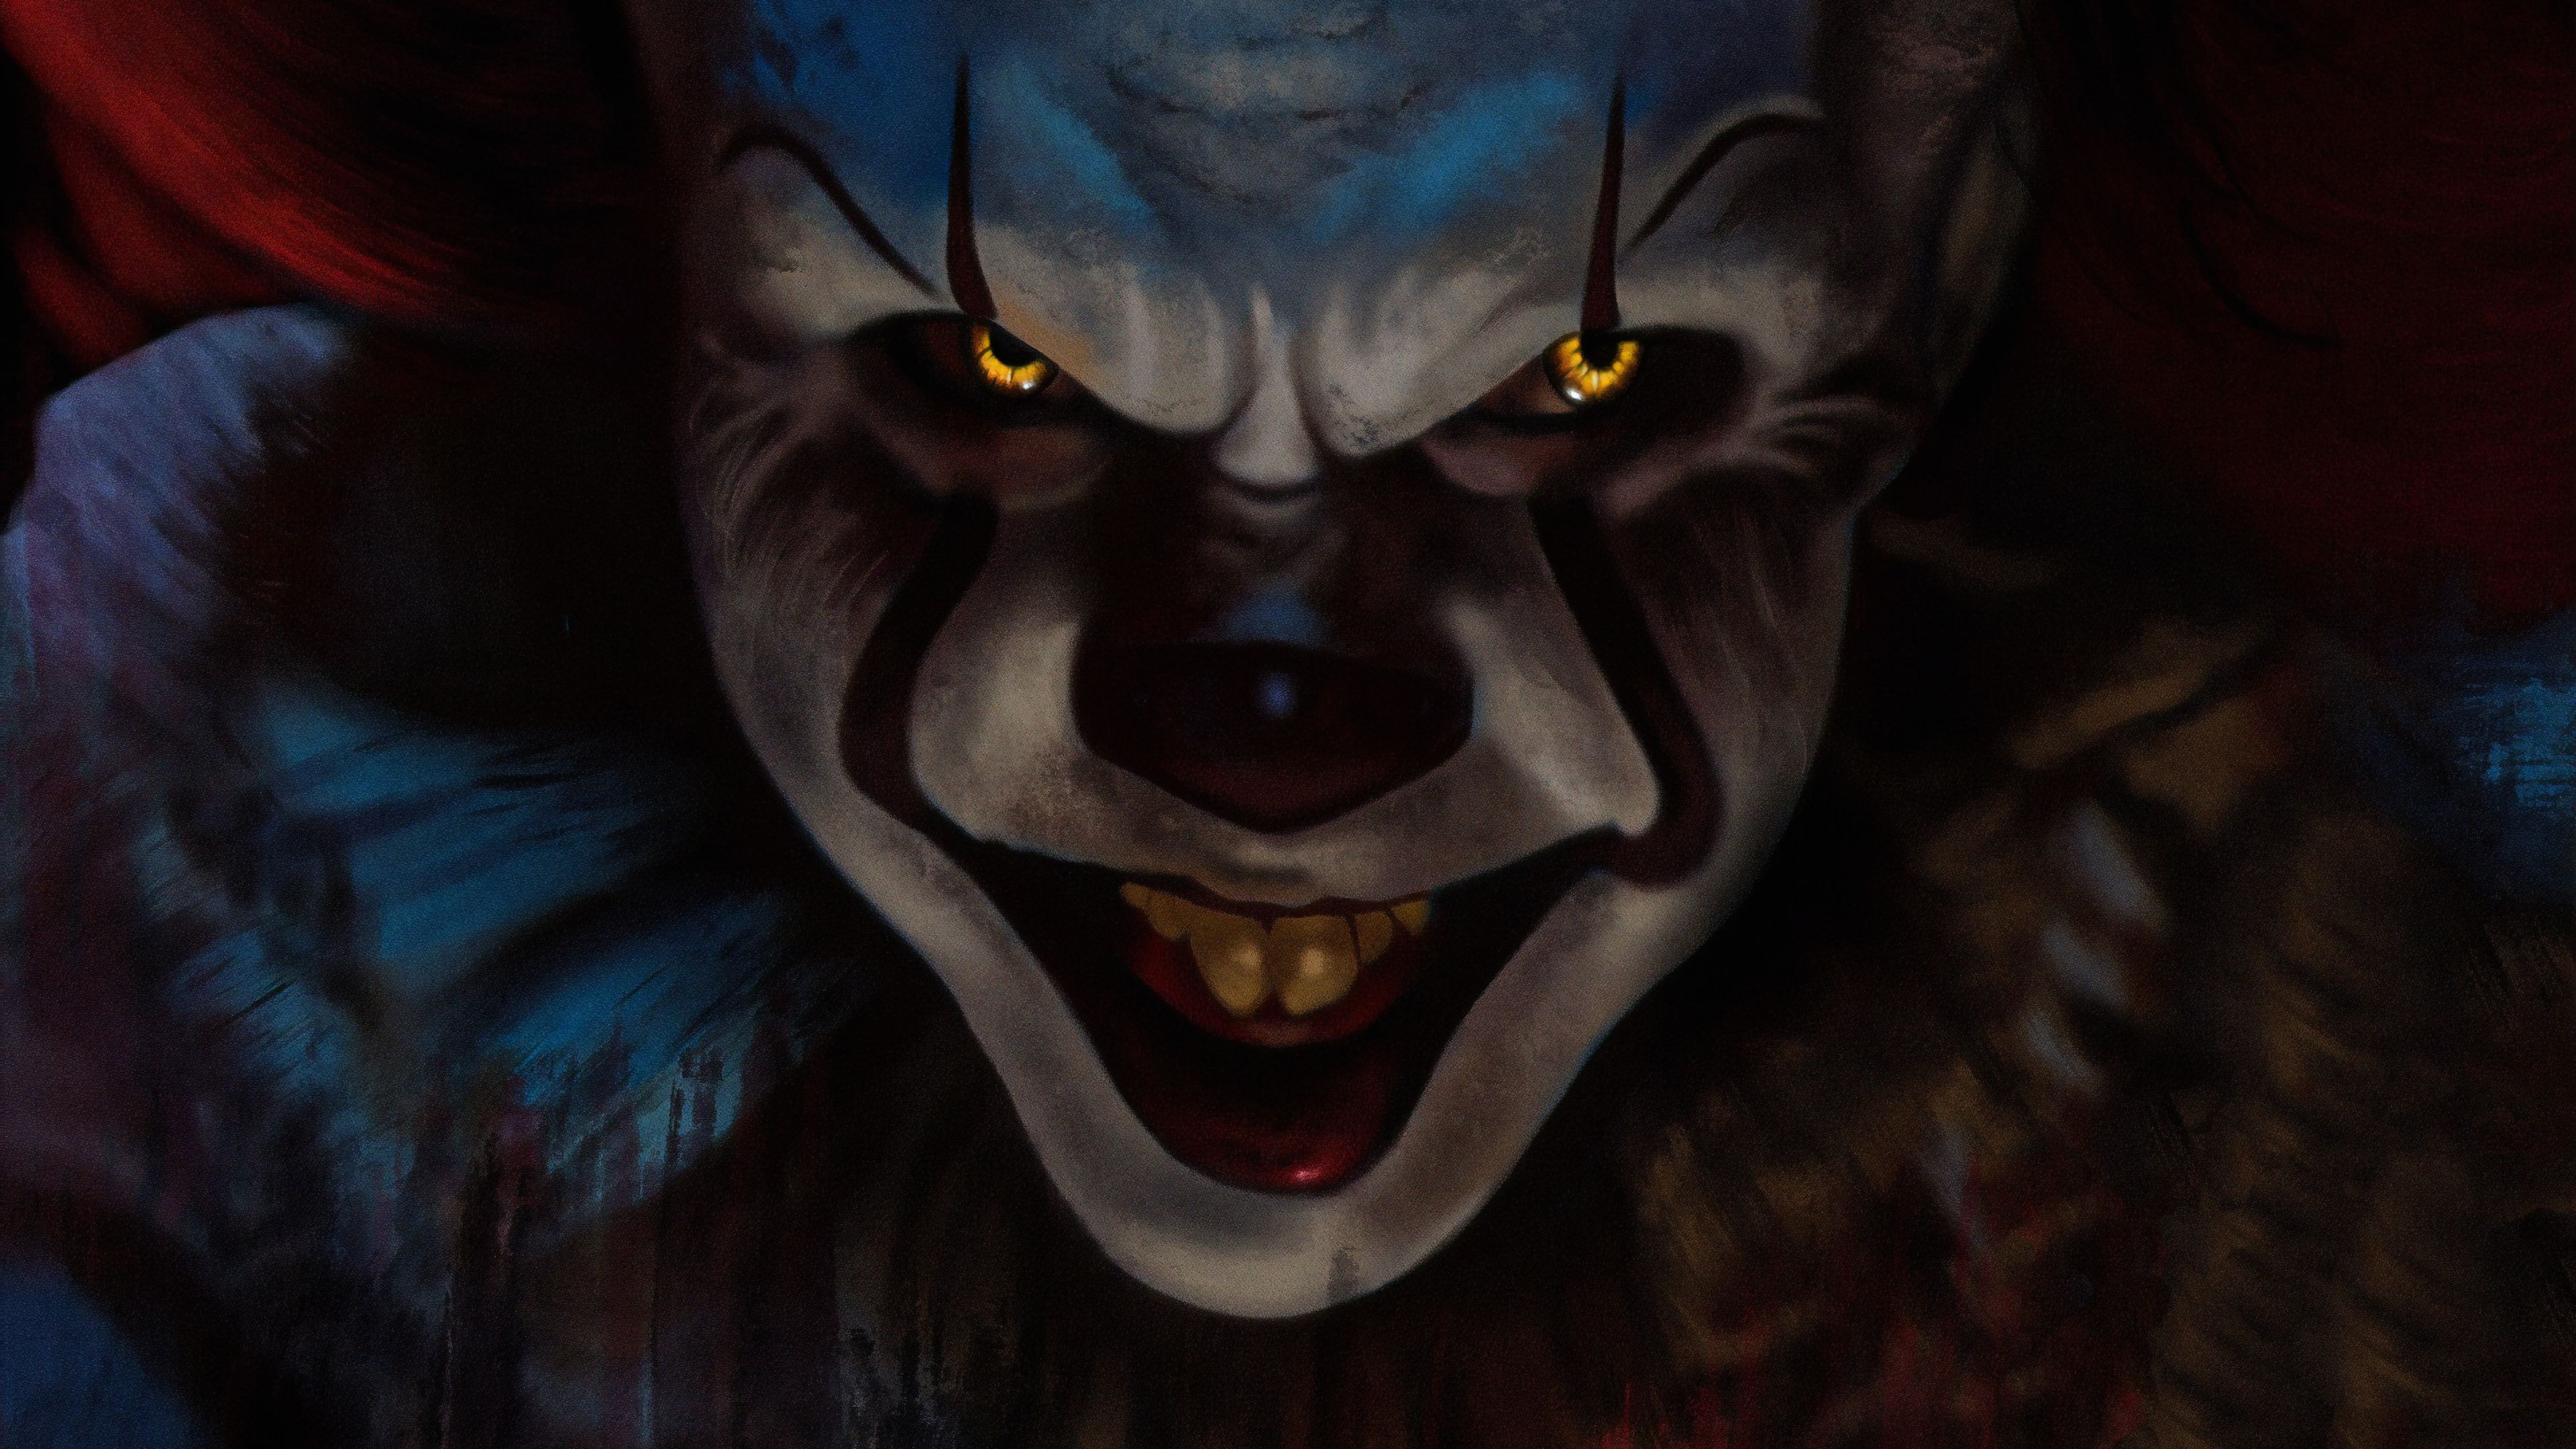 3840x2160 Pennywise 2019 pennywise wallpapers, movies wallpapers, hd-wallpapers, artwork wallpapers | Pennywise, Movie wallpapers, Creepy pictures